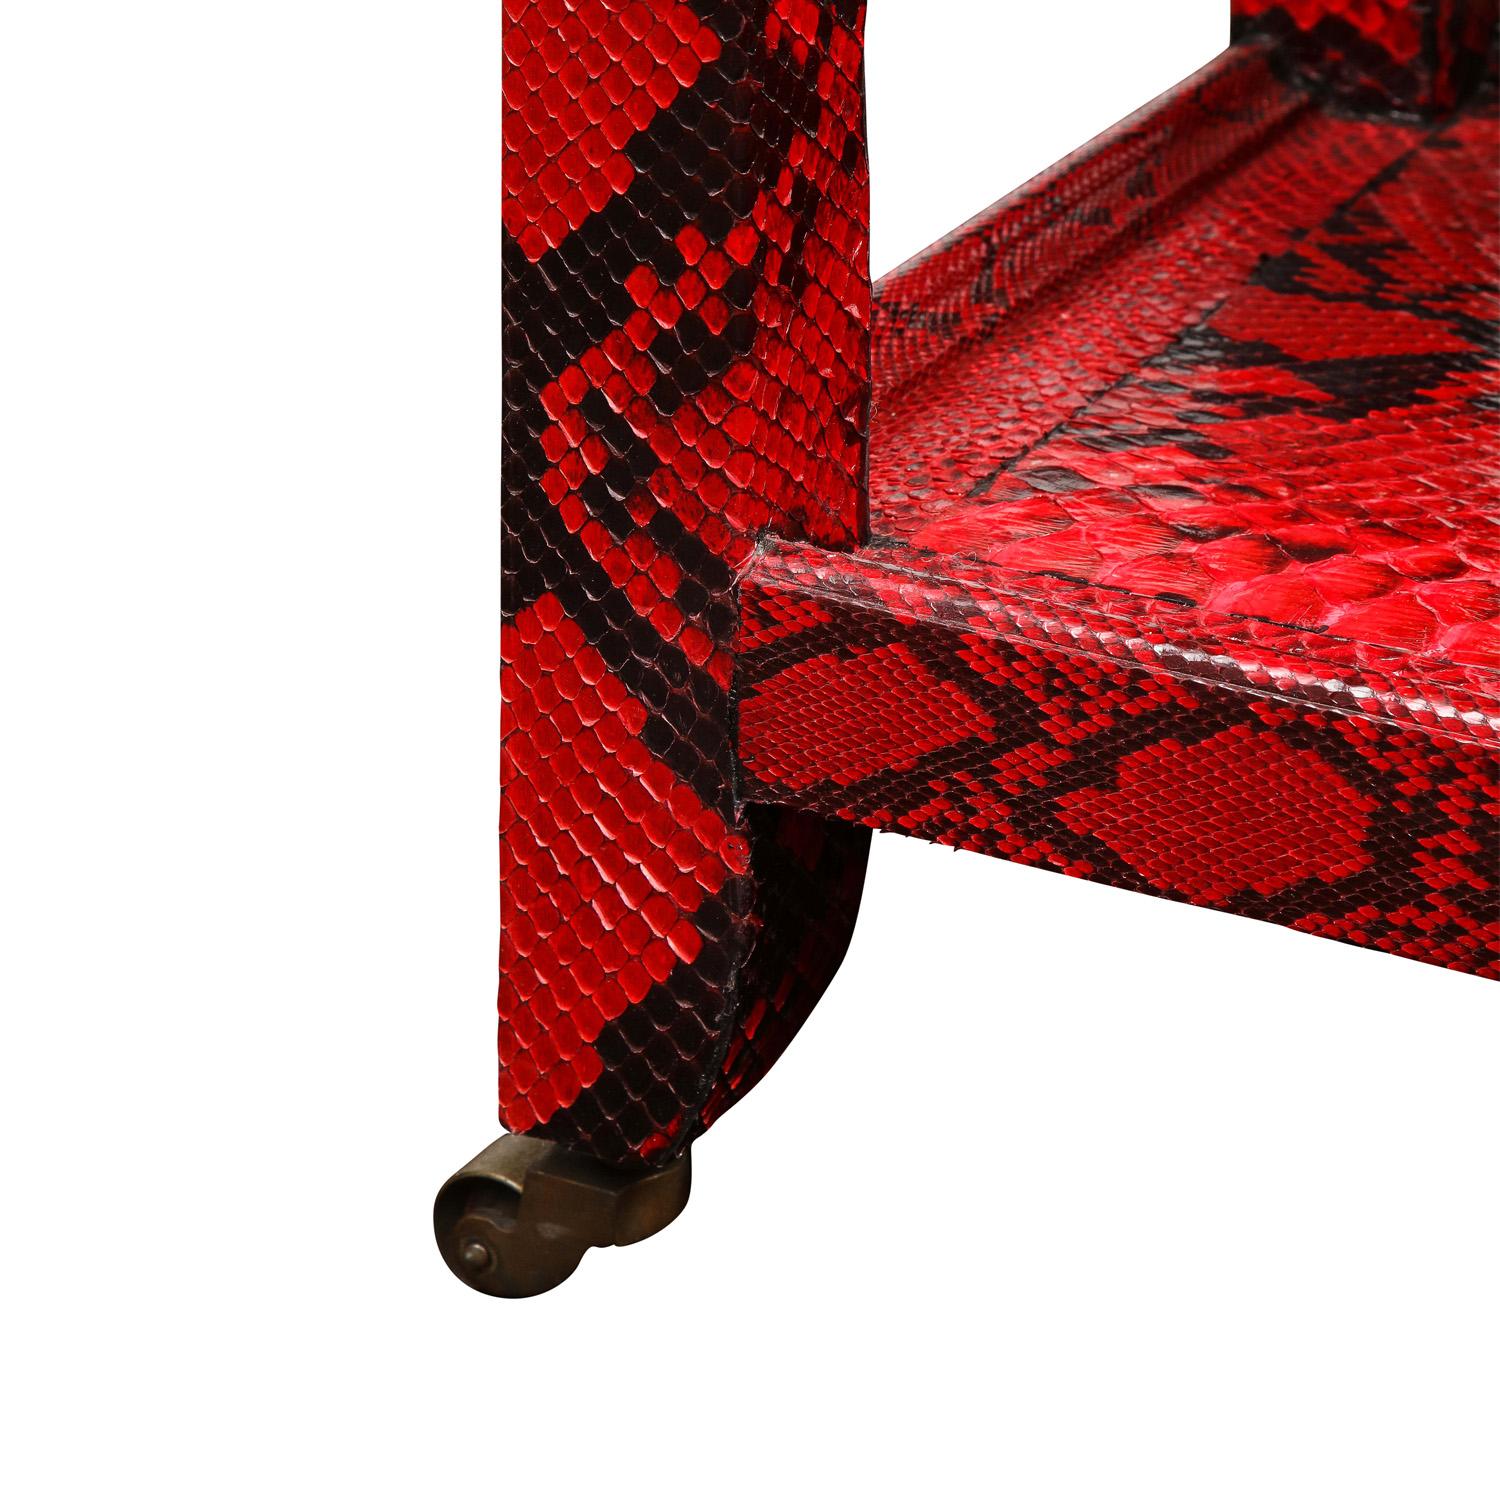 Hand-Crafted Karl Springer 2-Tier Side Table in Red Python with Horn Handles 1977, 'Signed' For Sale